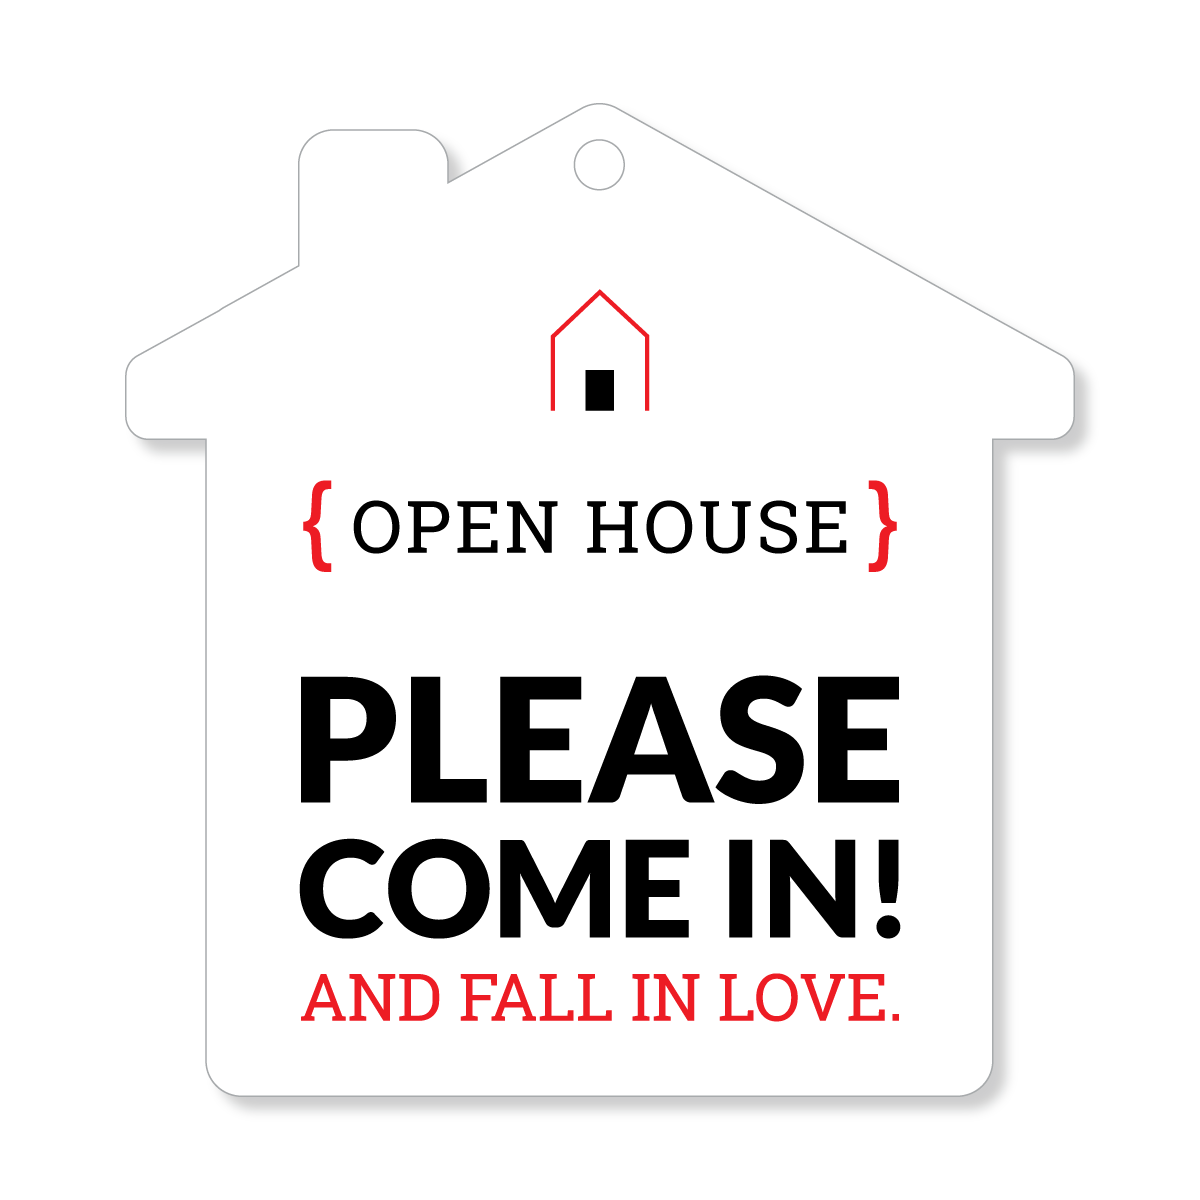 Open House Door Sign - Please come in! - All Things Real Estate